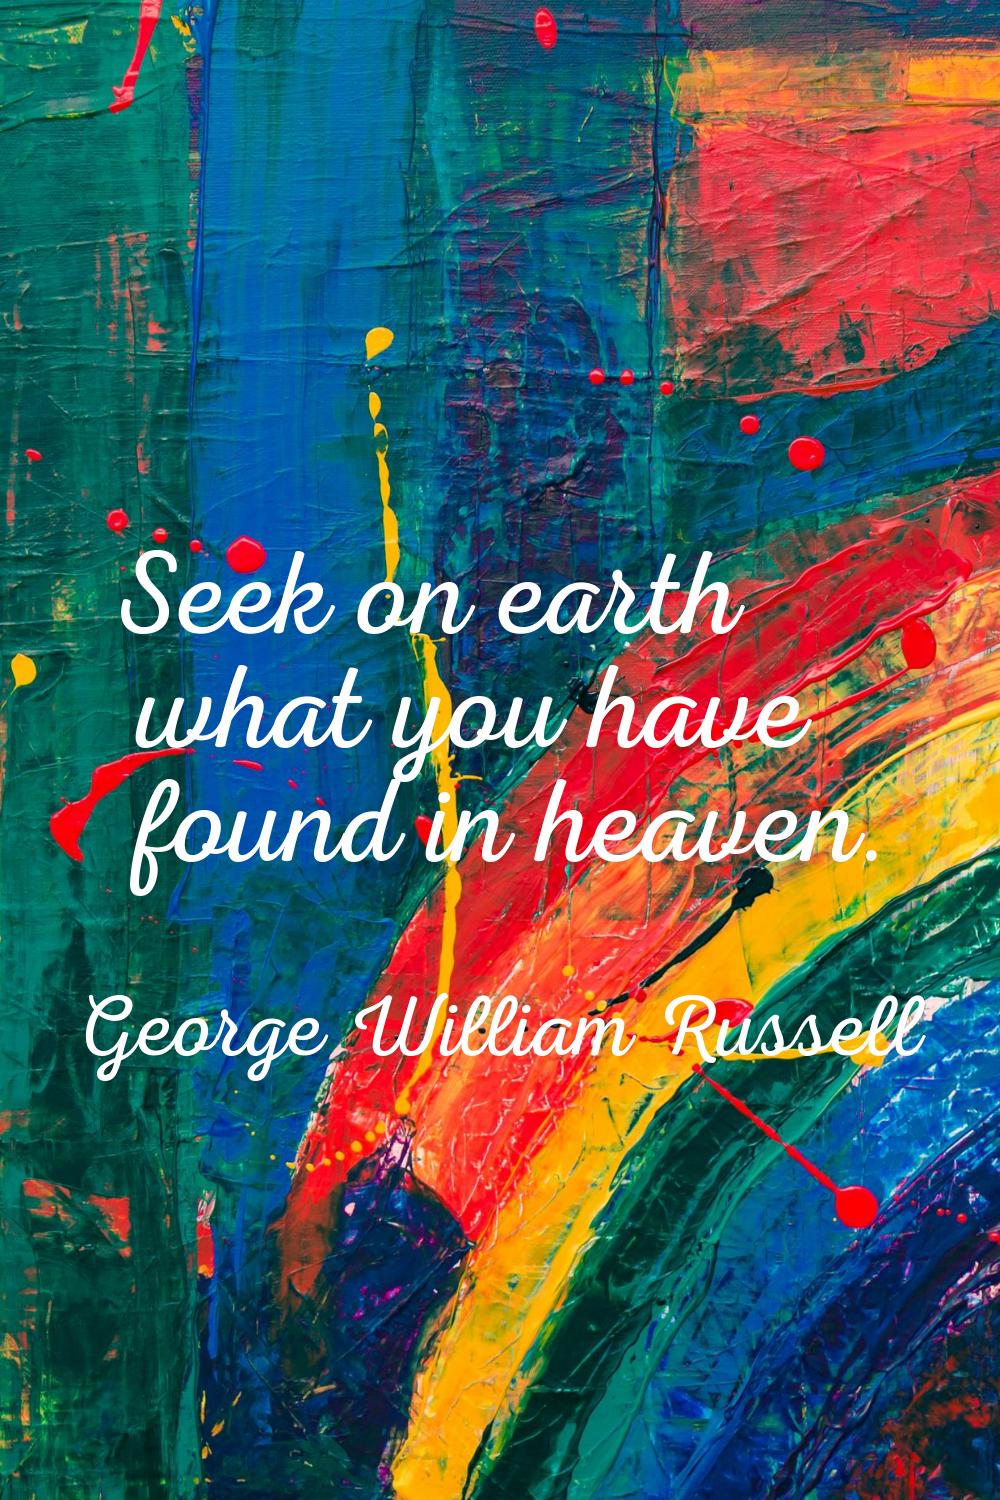 Seek on earth what you have found in heaven.